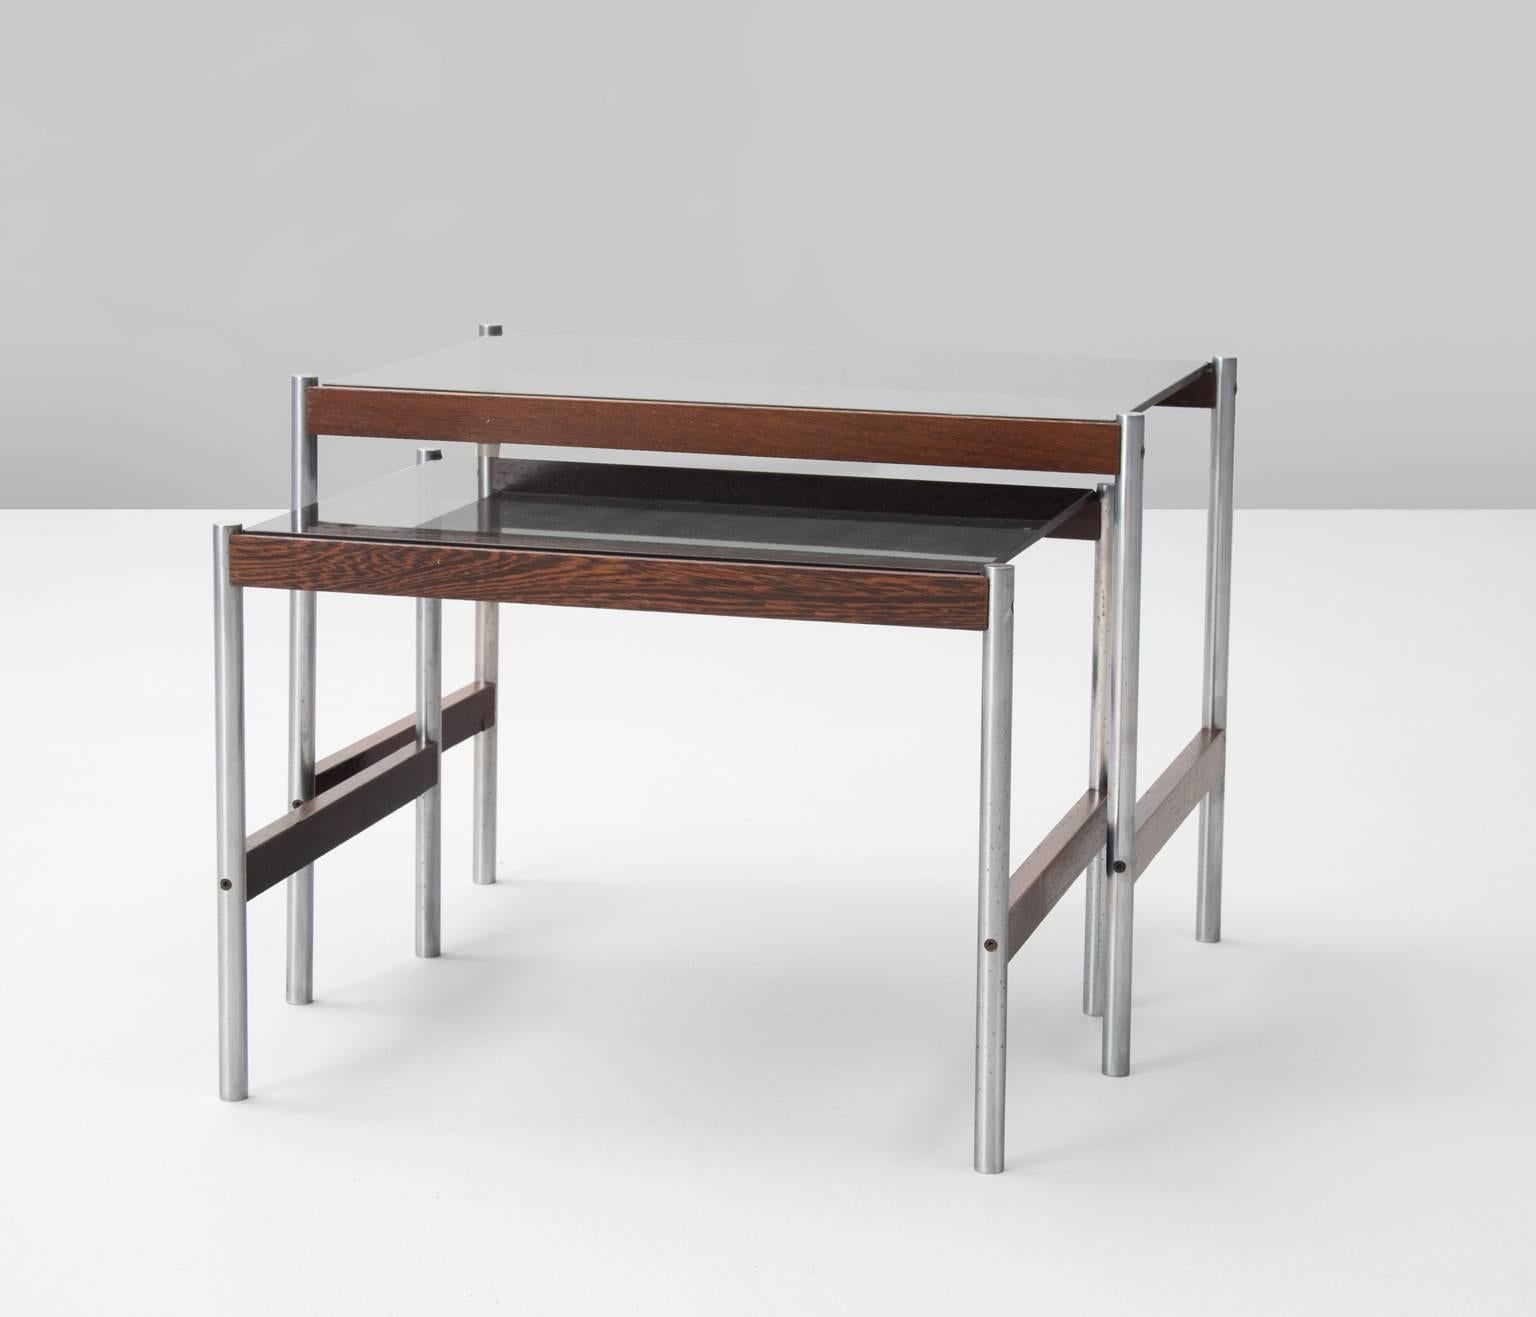 European Set of Two Nesting Tables with Brushed Steel and Wood